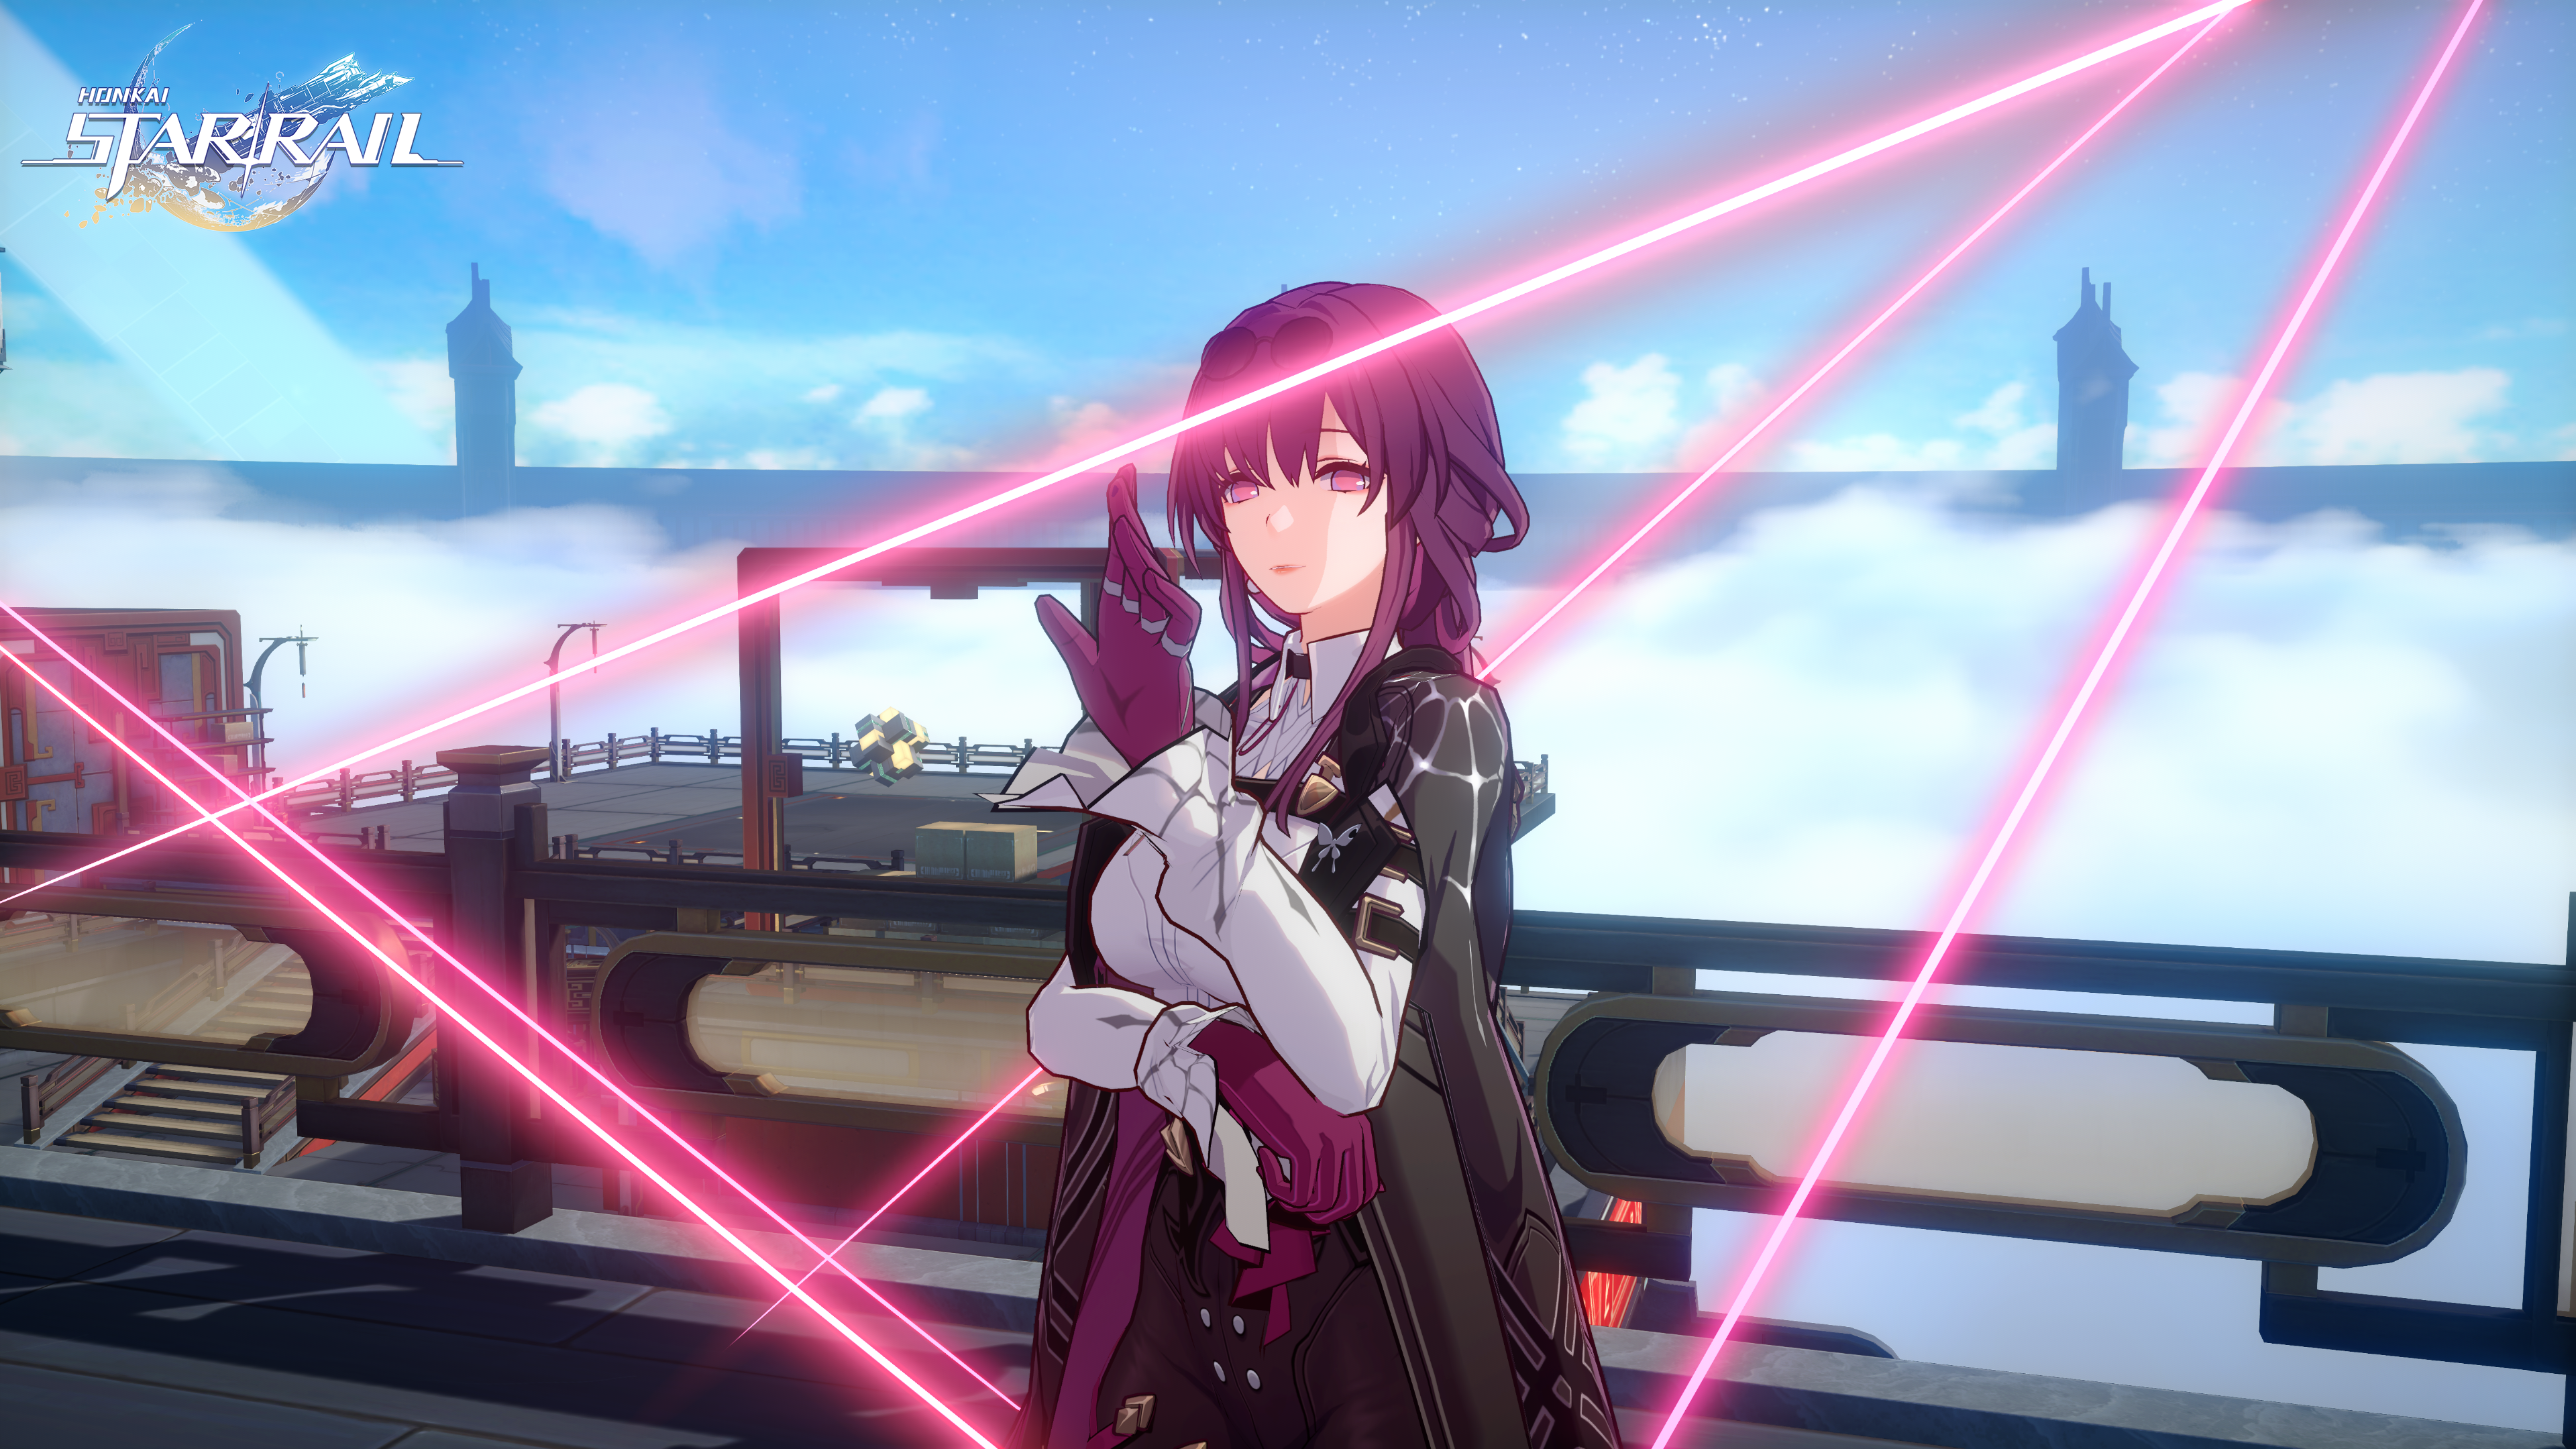 New Honkai: Star Rail Story Trailer Shows How Deliciously Bad Kafka Can Be